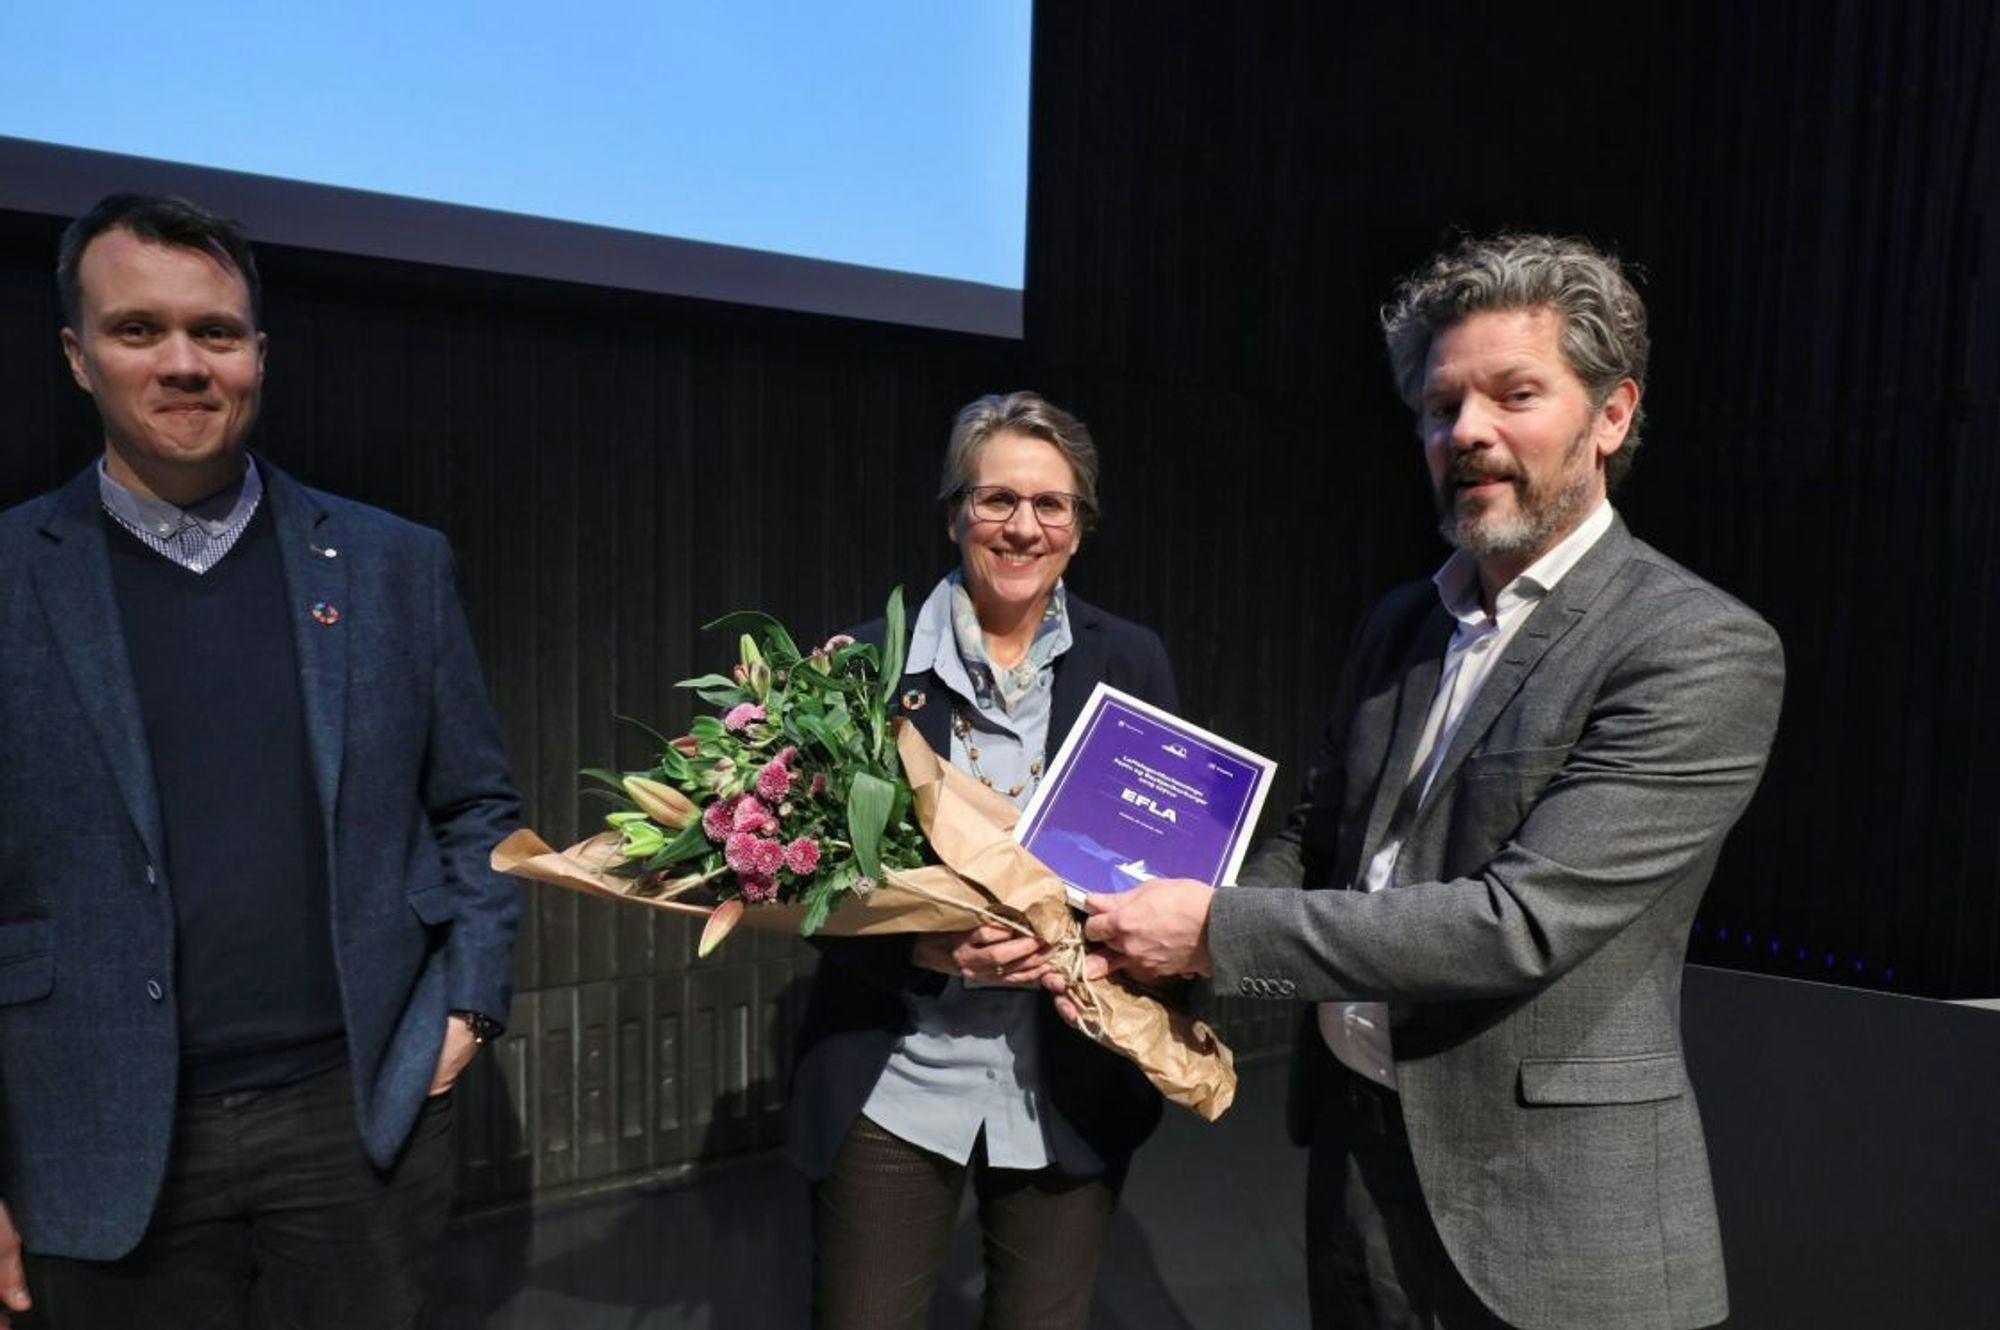 The Mayor of Reykjavik presenting the Climate Award and flower bouquet to EFLA representatives